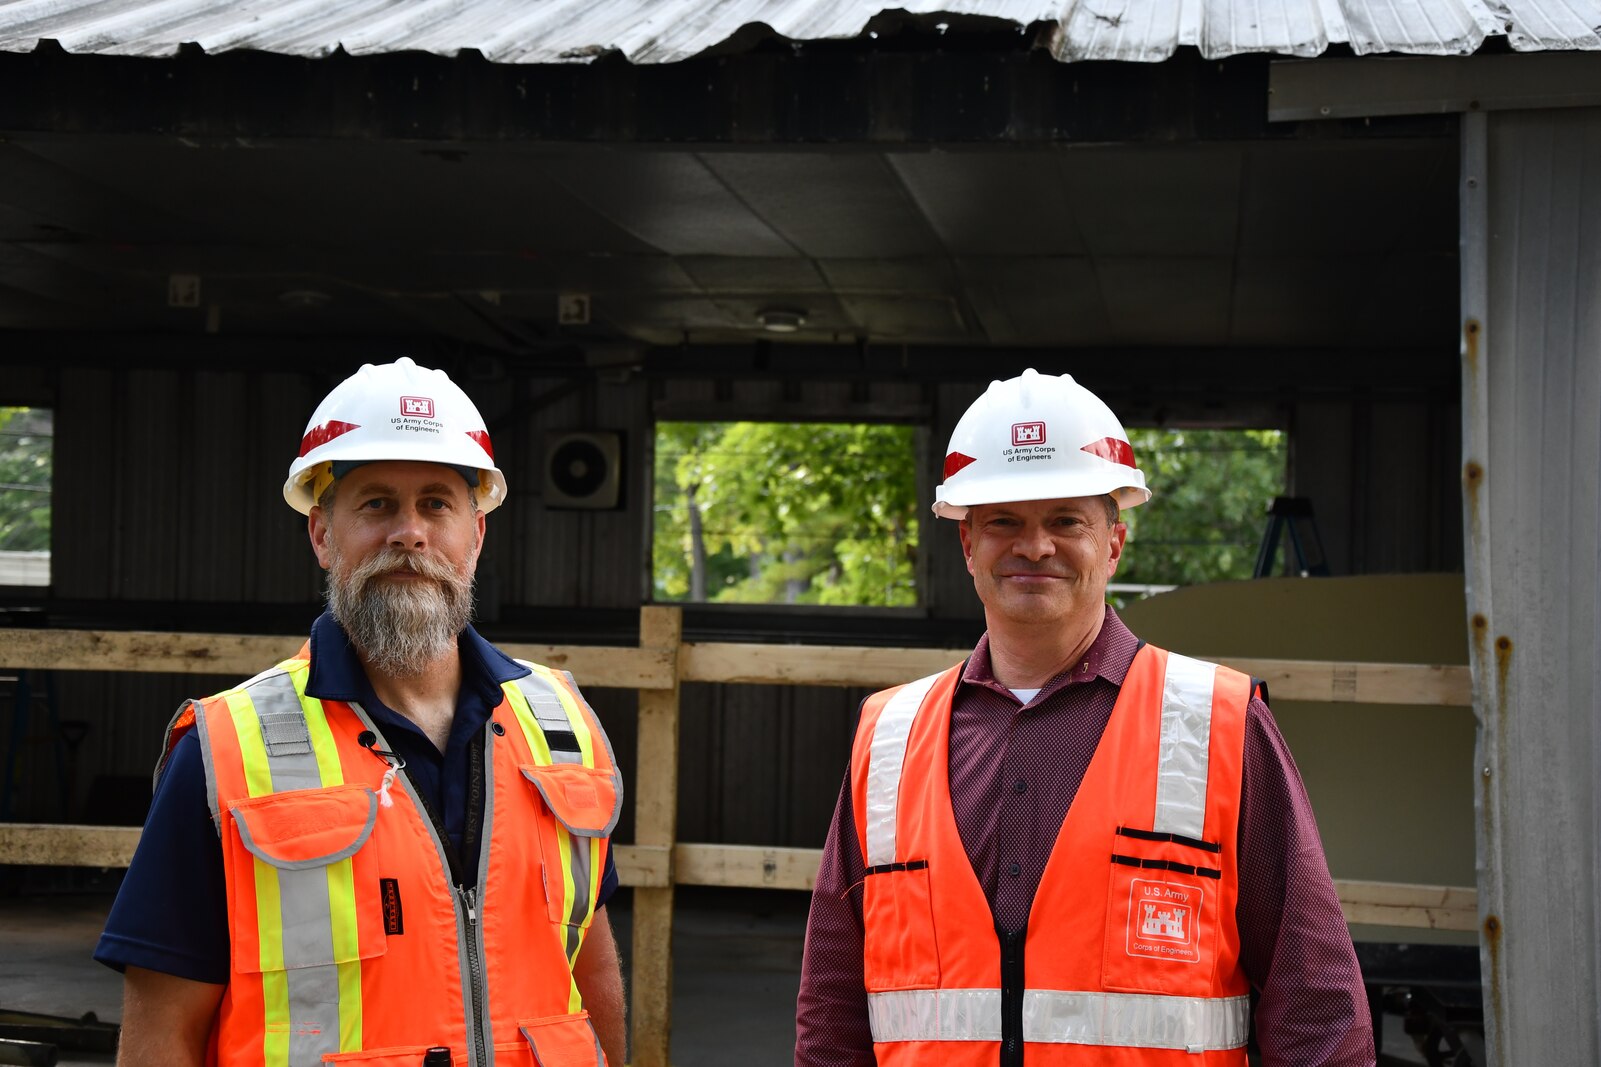 Contracting Officer's Representative Mike Ruppert (left) and Project Manager Silas Bowman (right) stand in front of the Camp Buckner revitalization project at the U.S. Military Academy at West Point, New York.